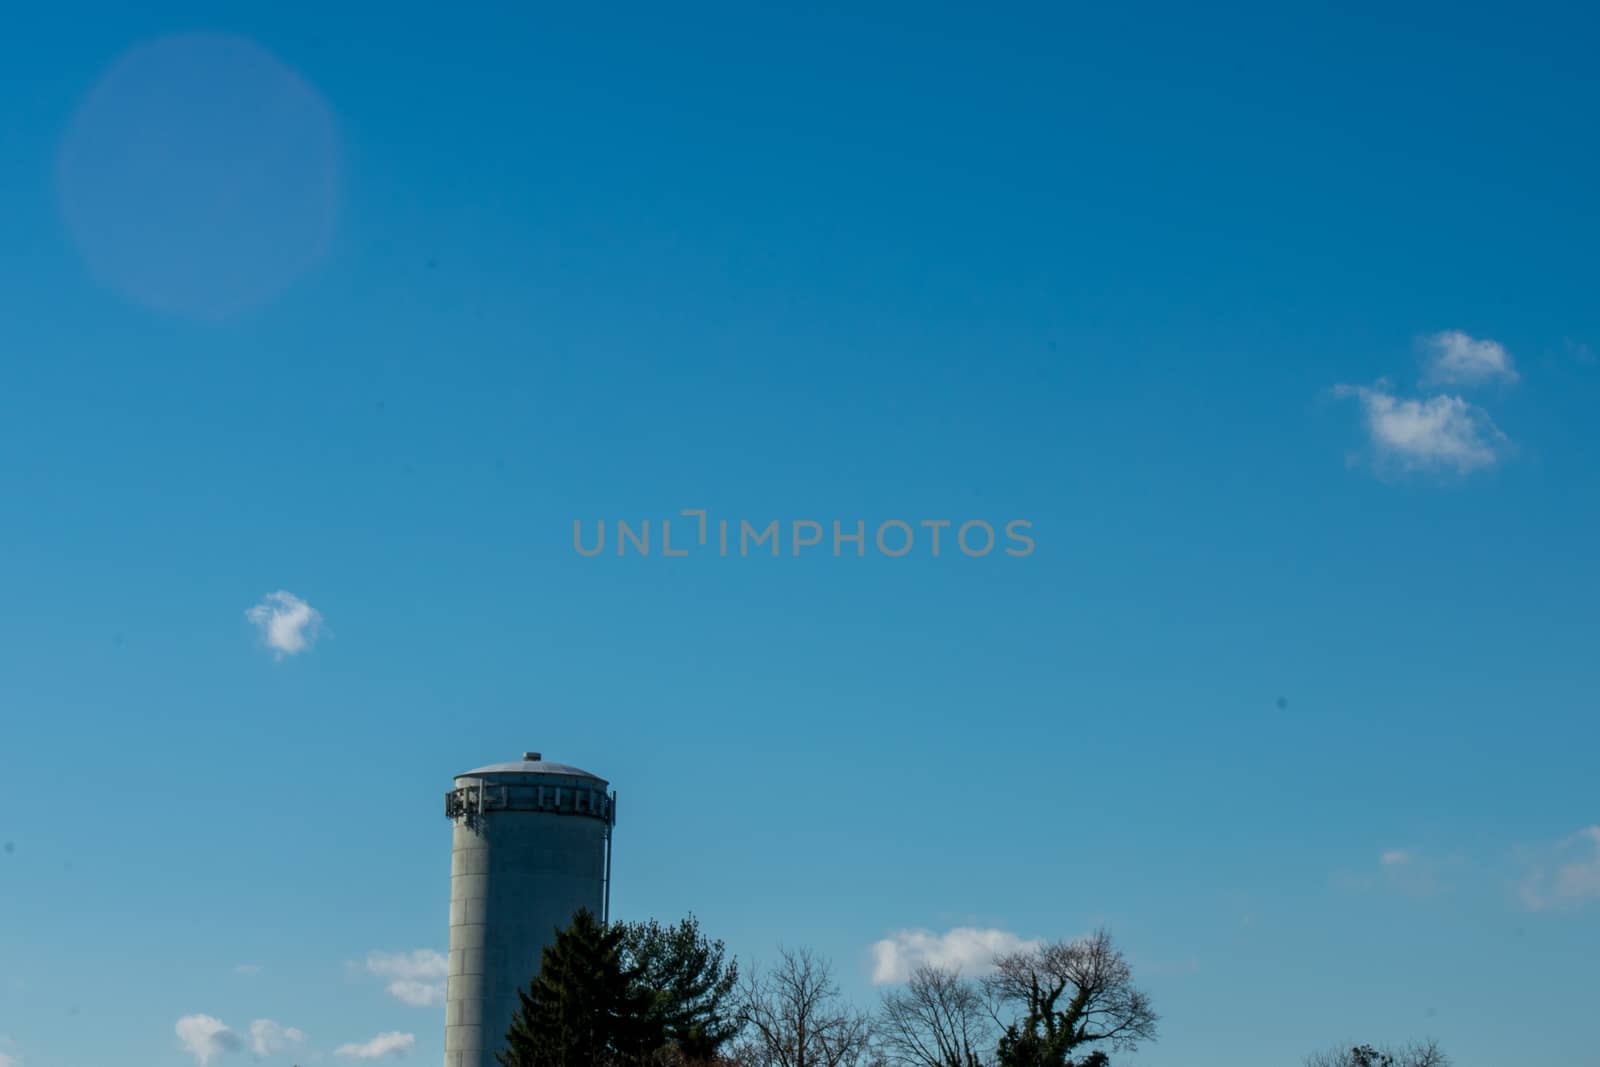 A Watertower In the Bottom of the Frame on a Clear Blue Sky by bju12290